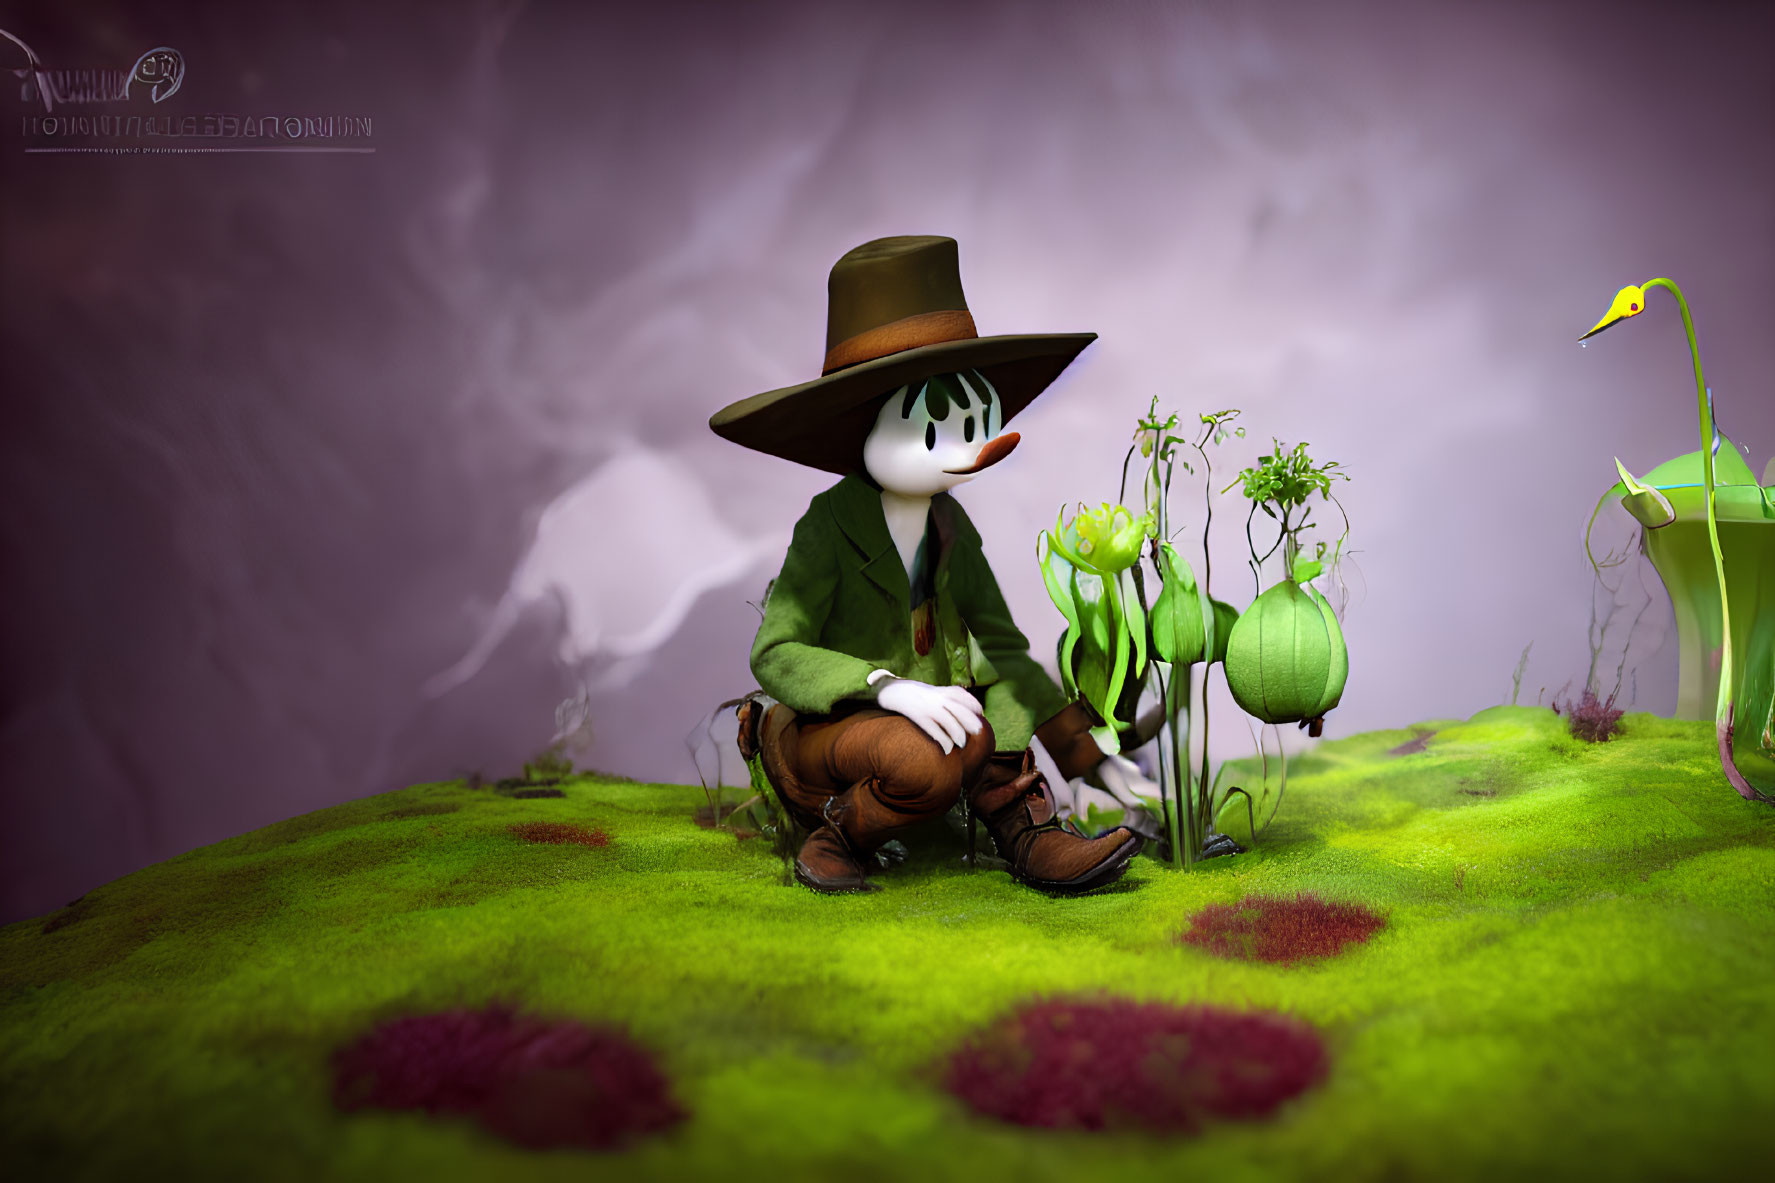 Stylized character with white mask and hat on green hill with yellow creature peeking.